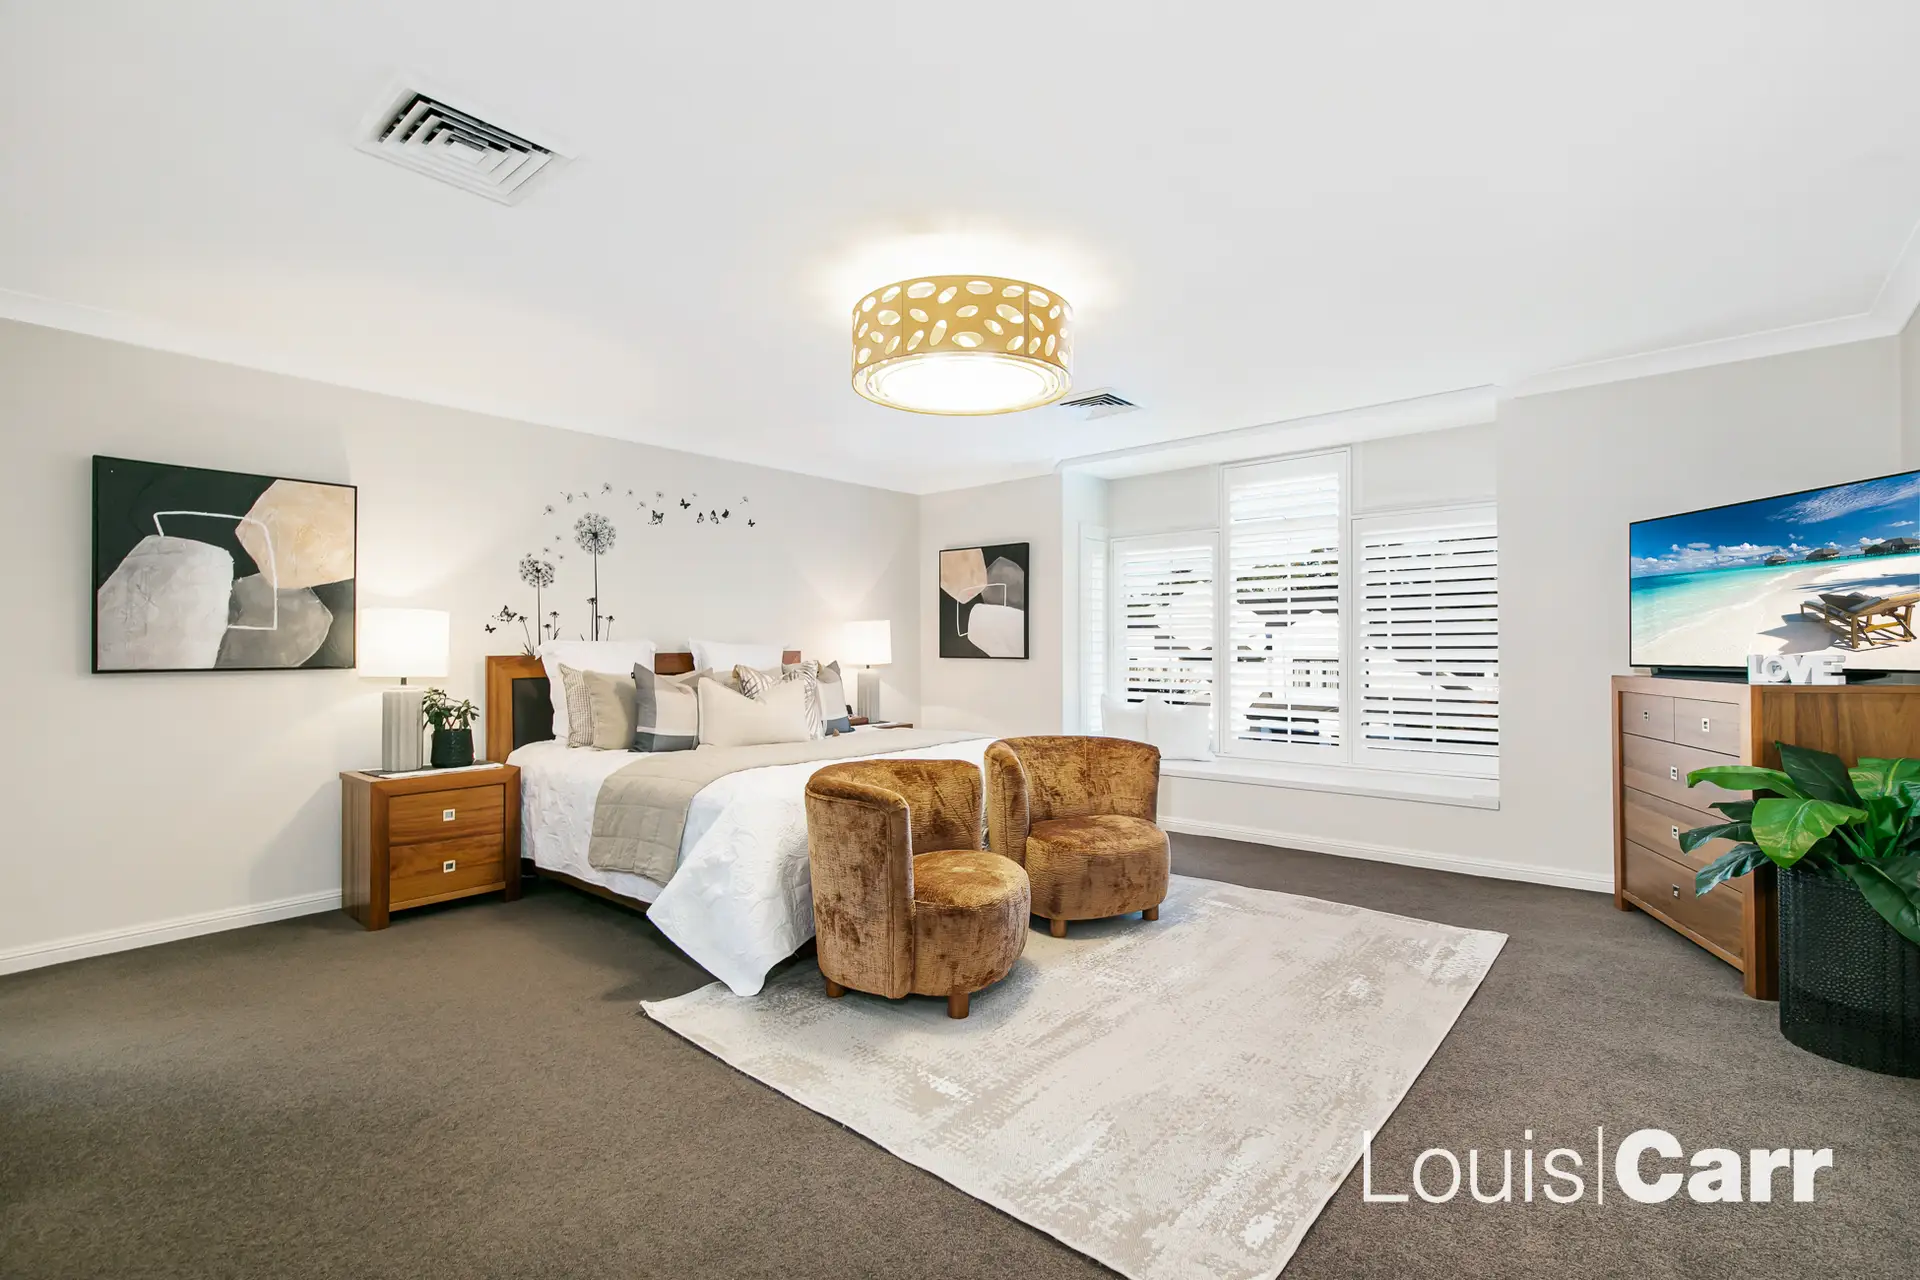 Photo #8: 12 Kambah Place, West Pennant Hills - Sold by Louis Carr Real Estate